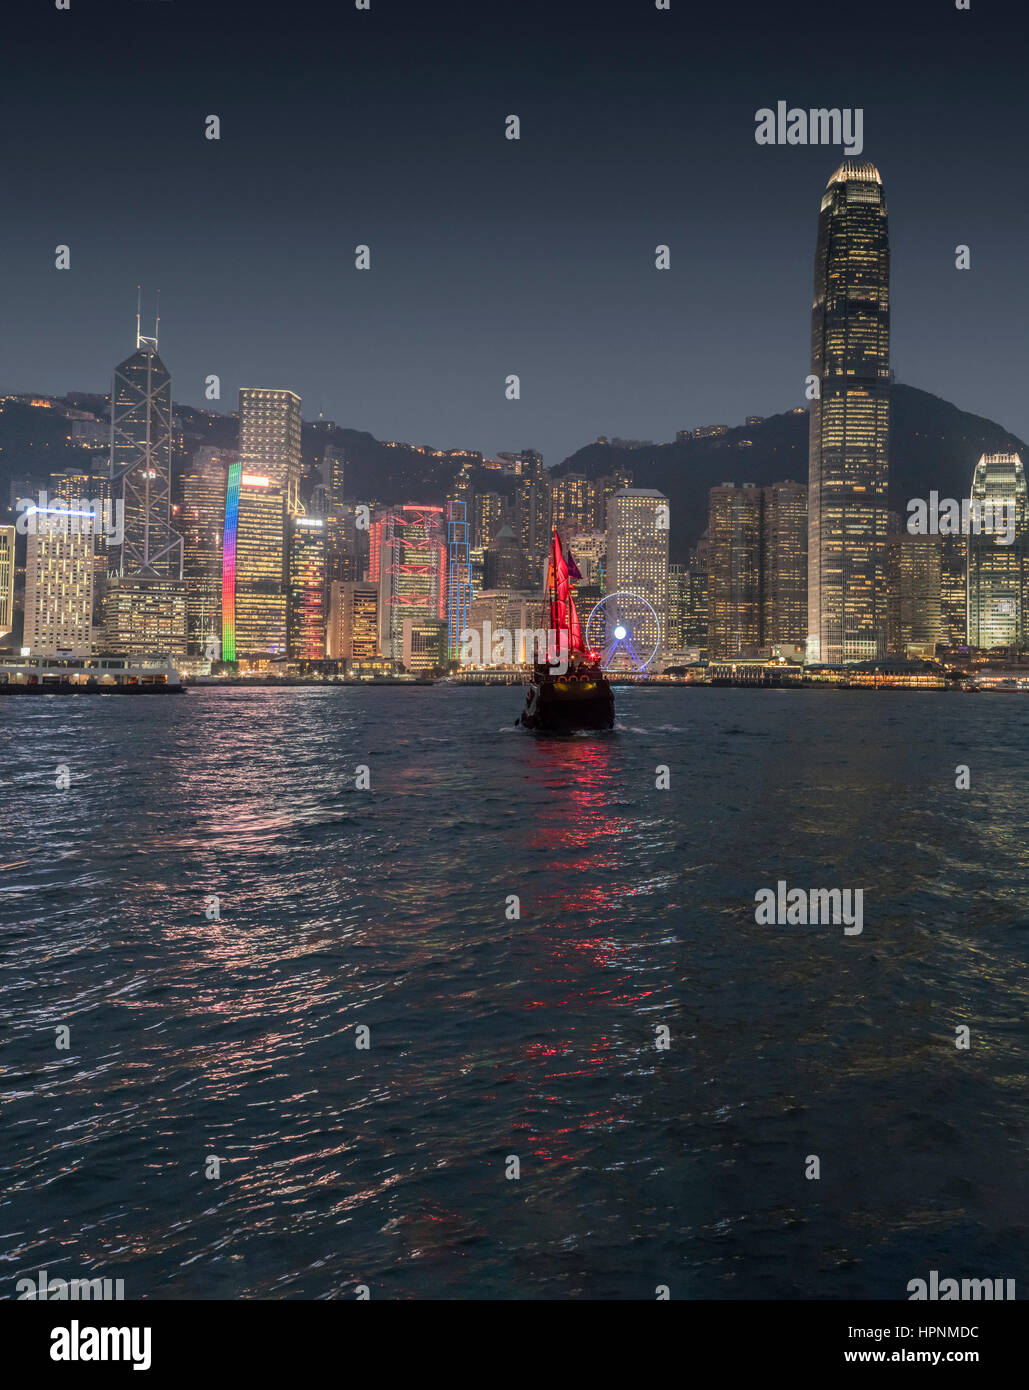 Old traditional Chinese ship with tourists sailing in the Victoria Harbour at night with the skyscrapers and the Hong Kong skyline. China. Stock Photo